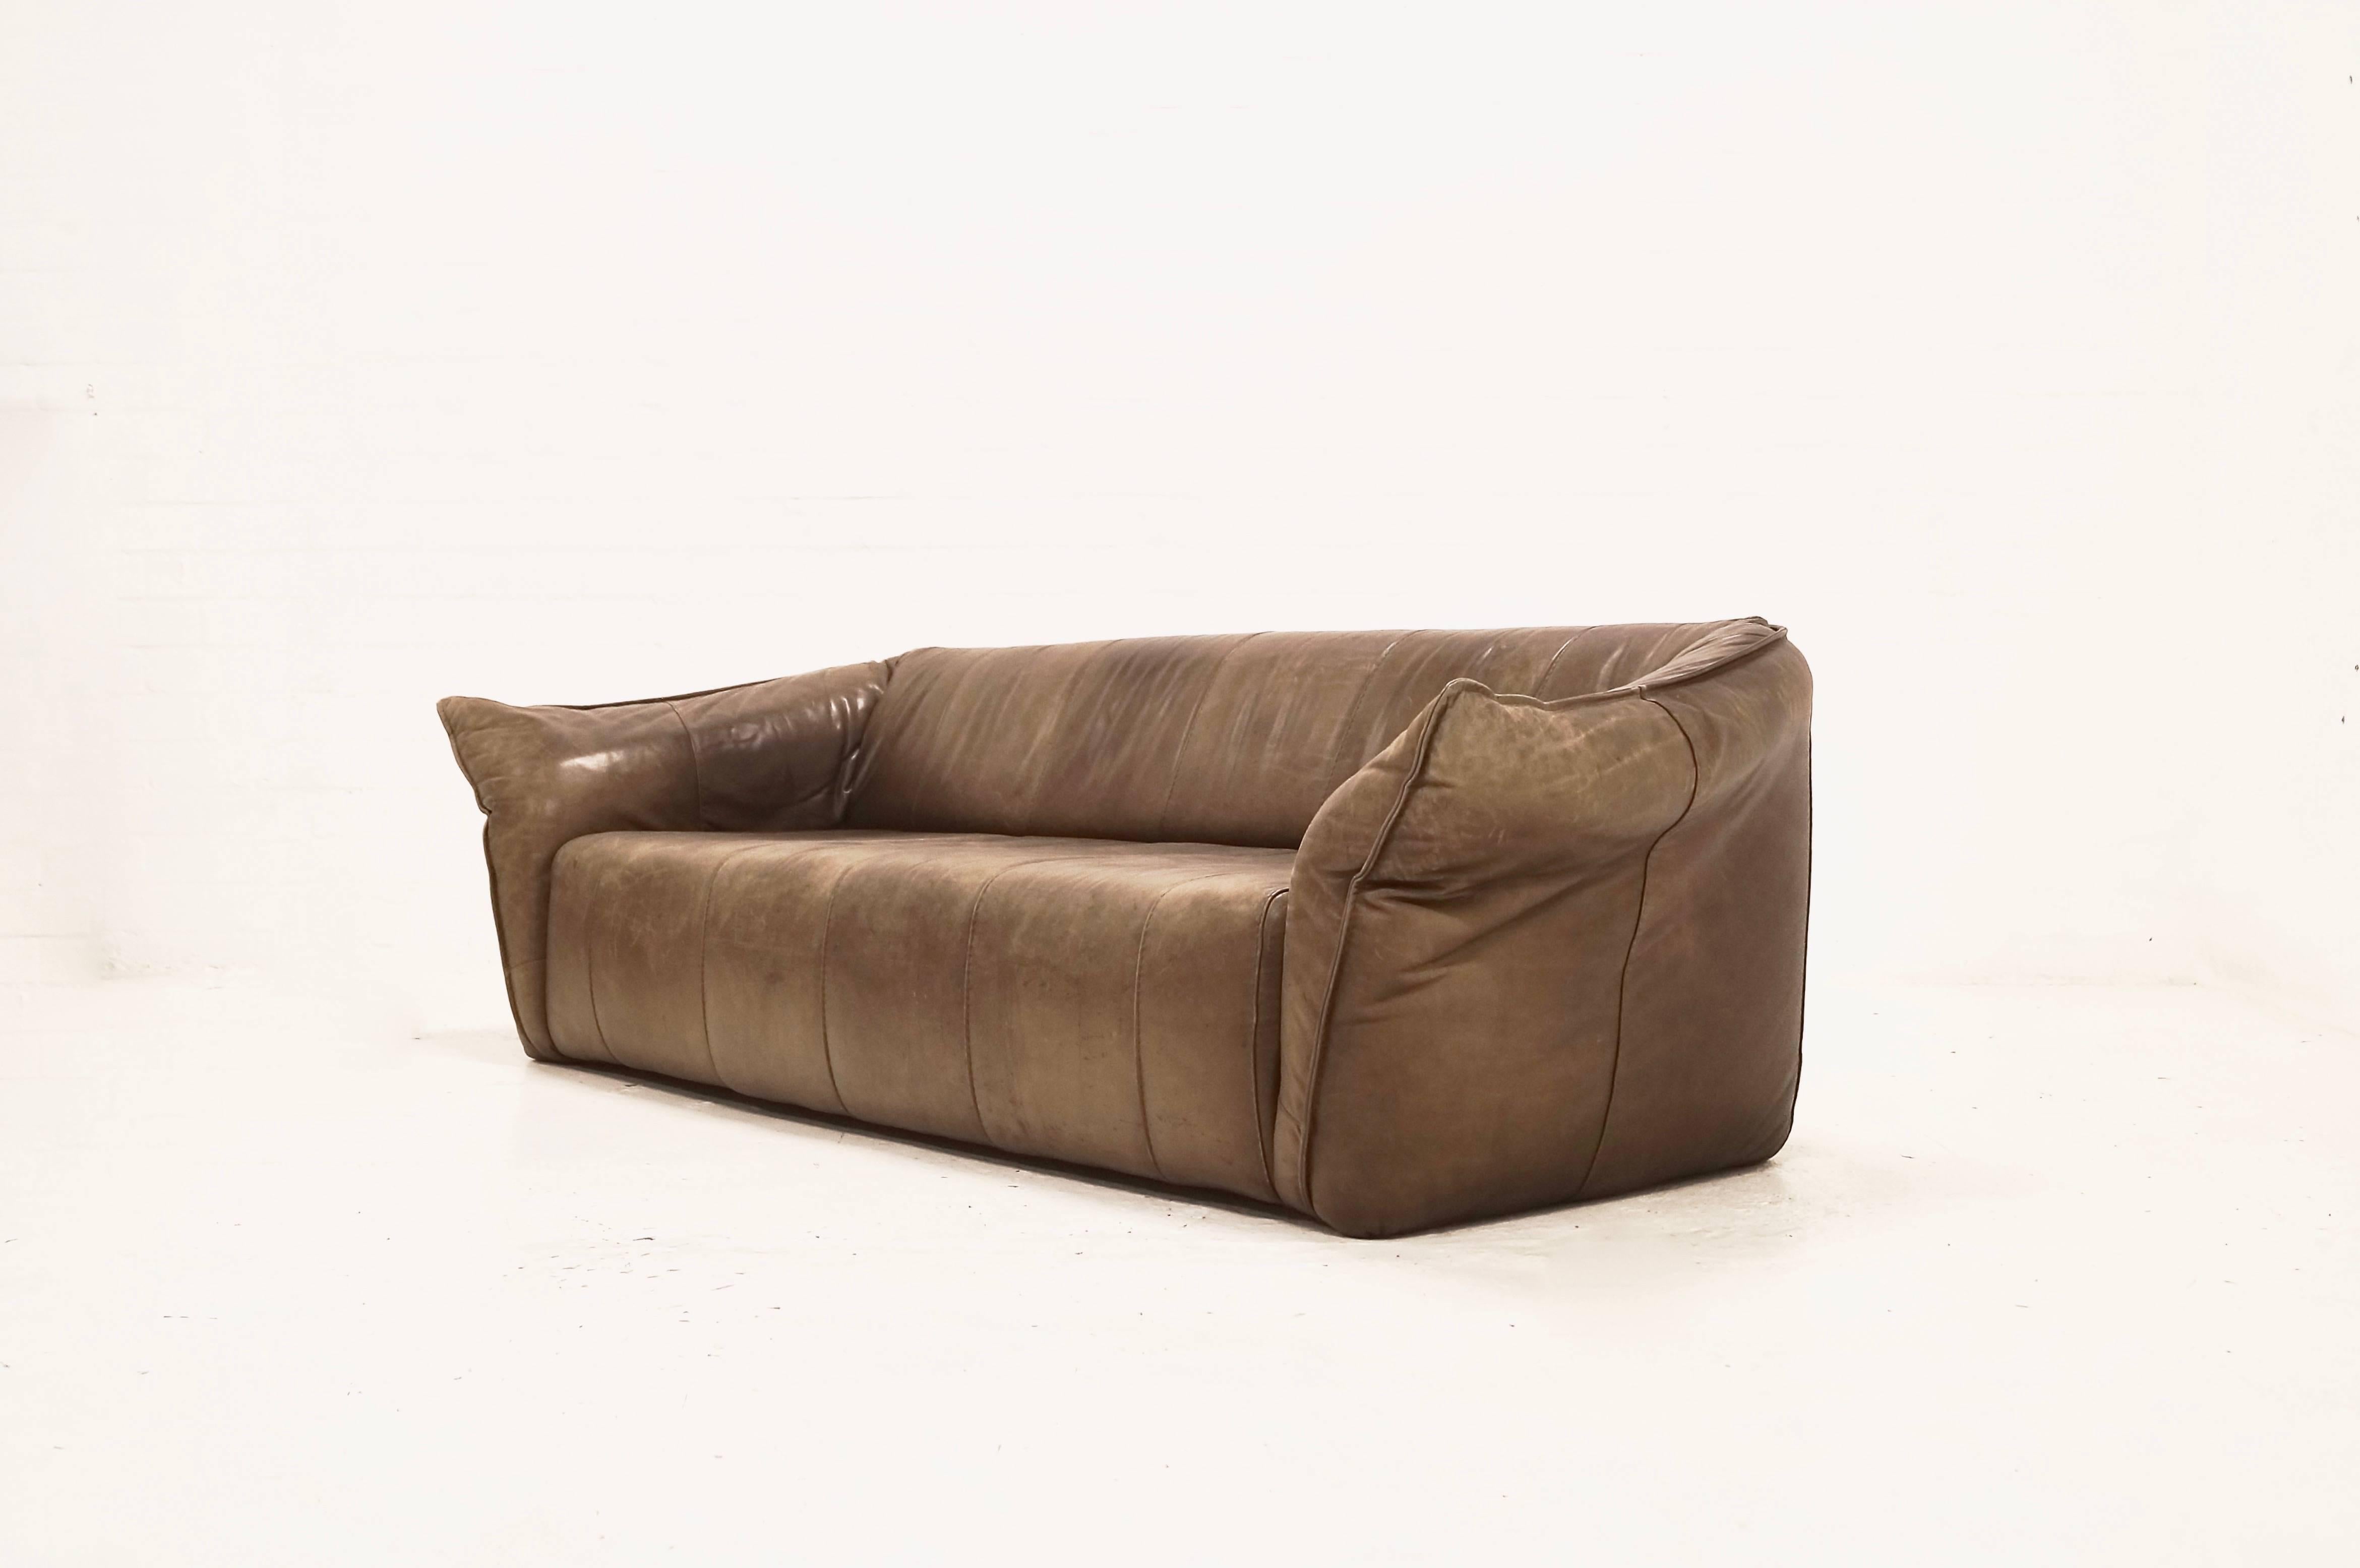 Rare 3,5-seat 'Andes' leather lounge sofa designed by Gerard Van Den Berg for Montis, the Netherlands, 1970s. Organic shaped sofa with quality leather. The sofa has an interesting design. The leather has gained a beautiful patina which creates a